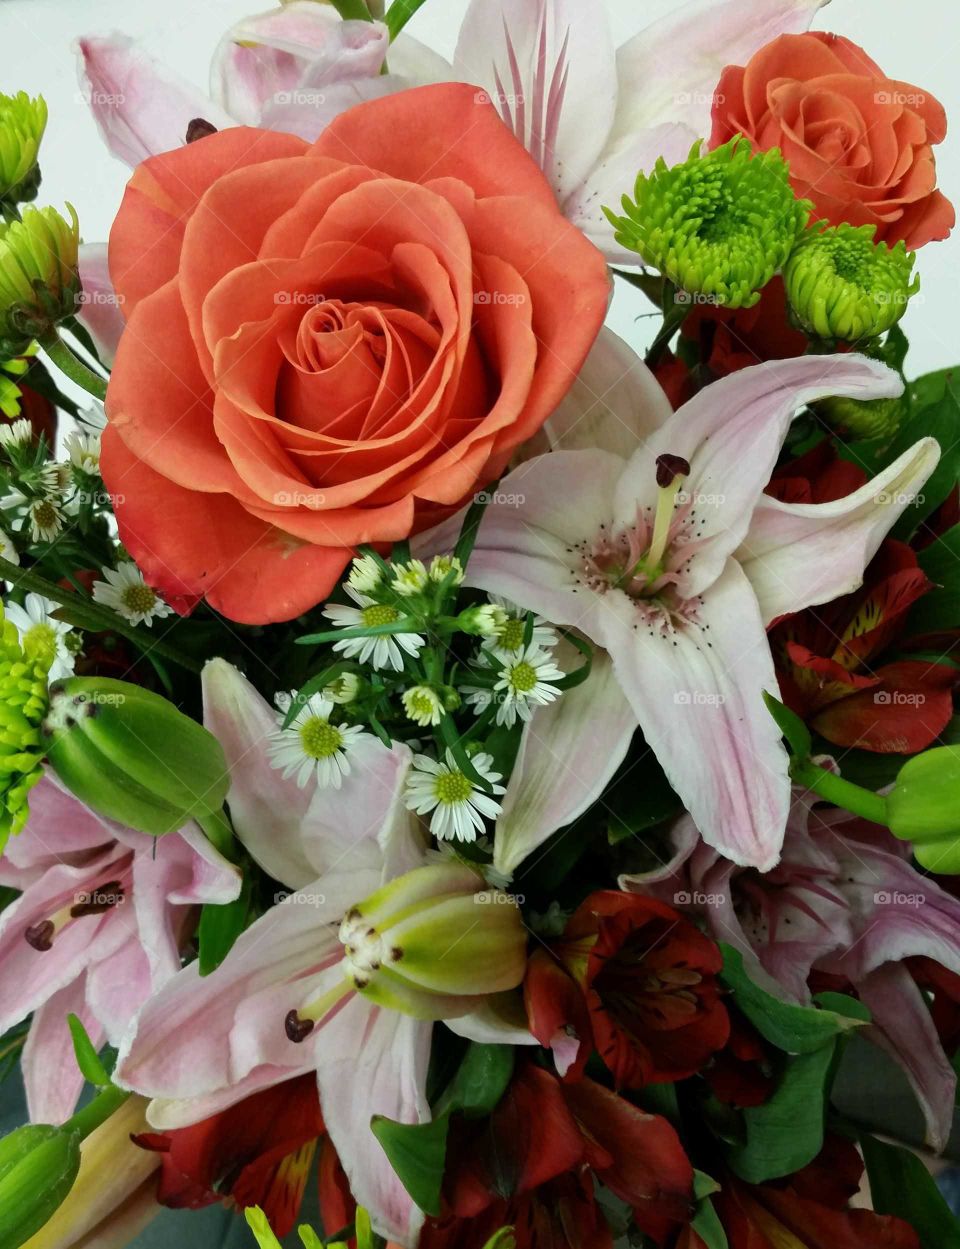 Flowers for Administrative Assistant Day